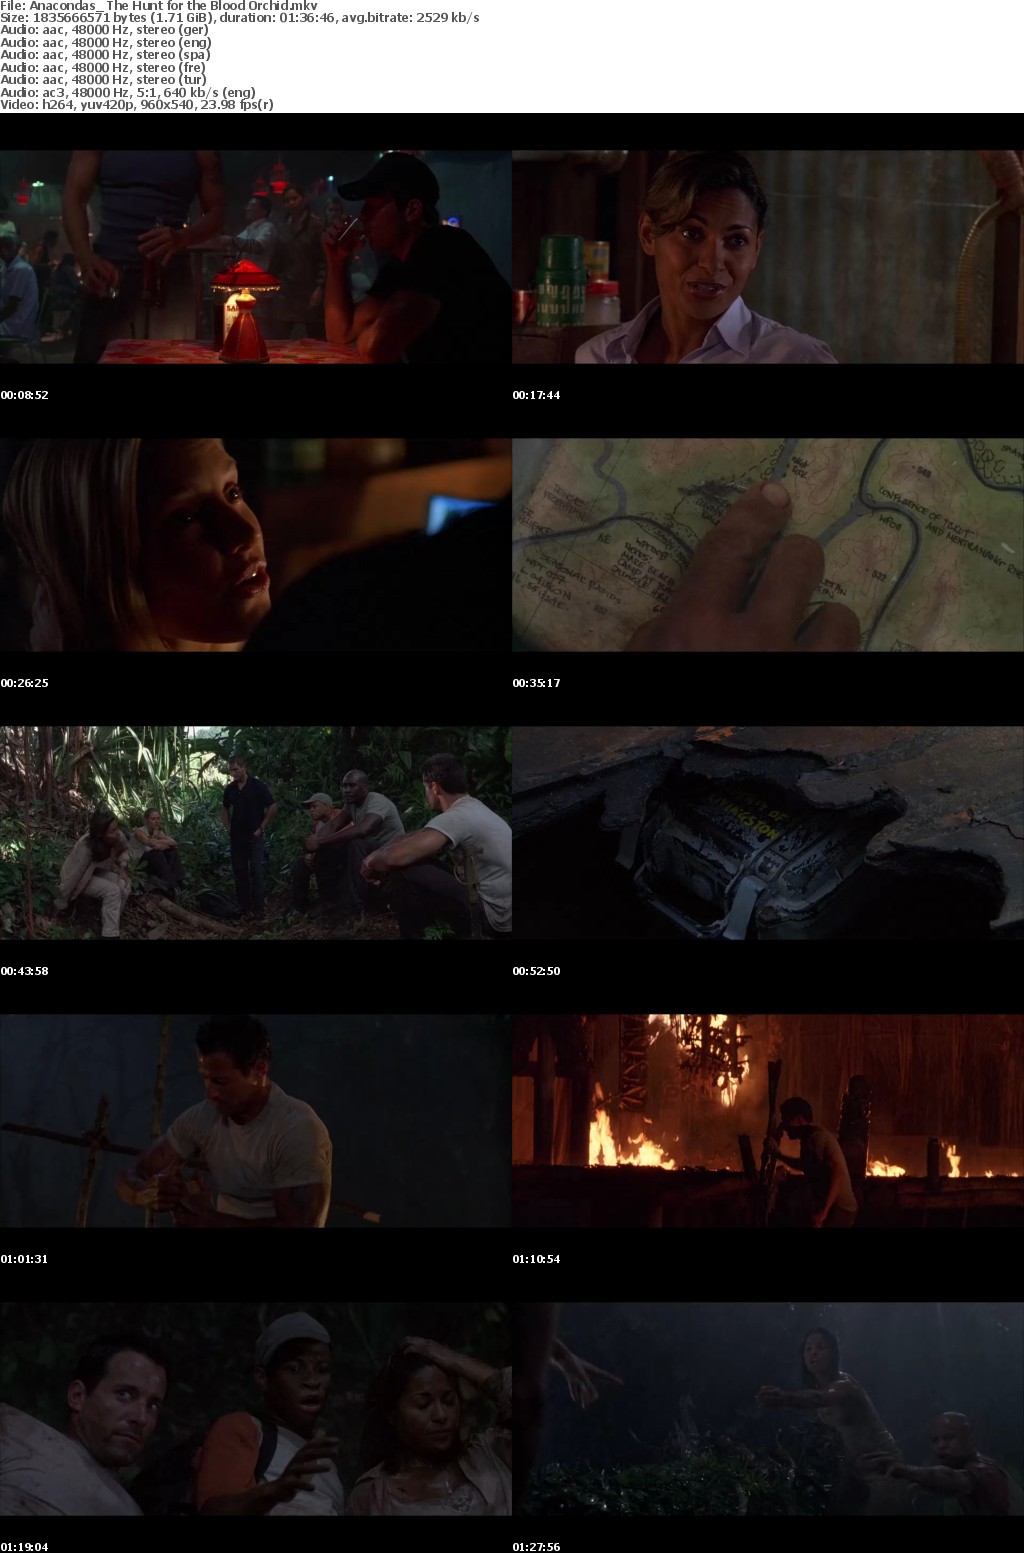 Anacondas The Hunt For The Blood Orchid 2004 WebDL x264 DDP5 1 WildBrian